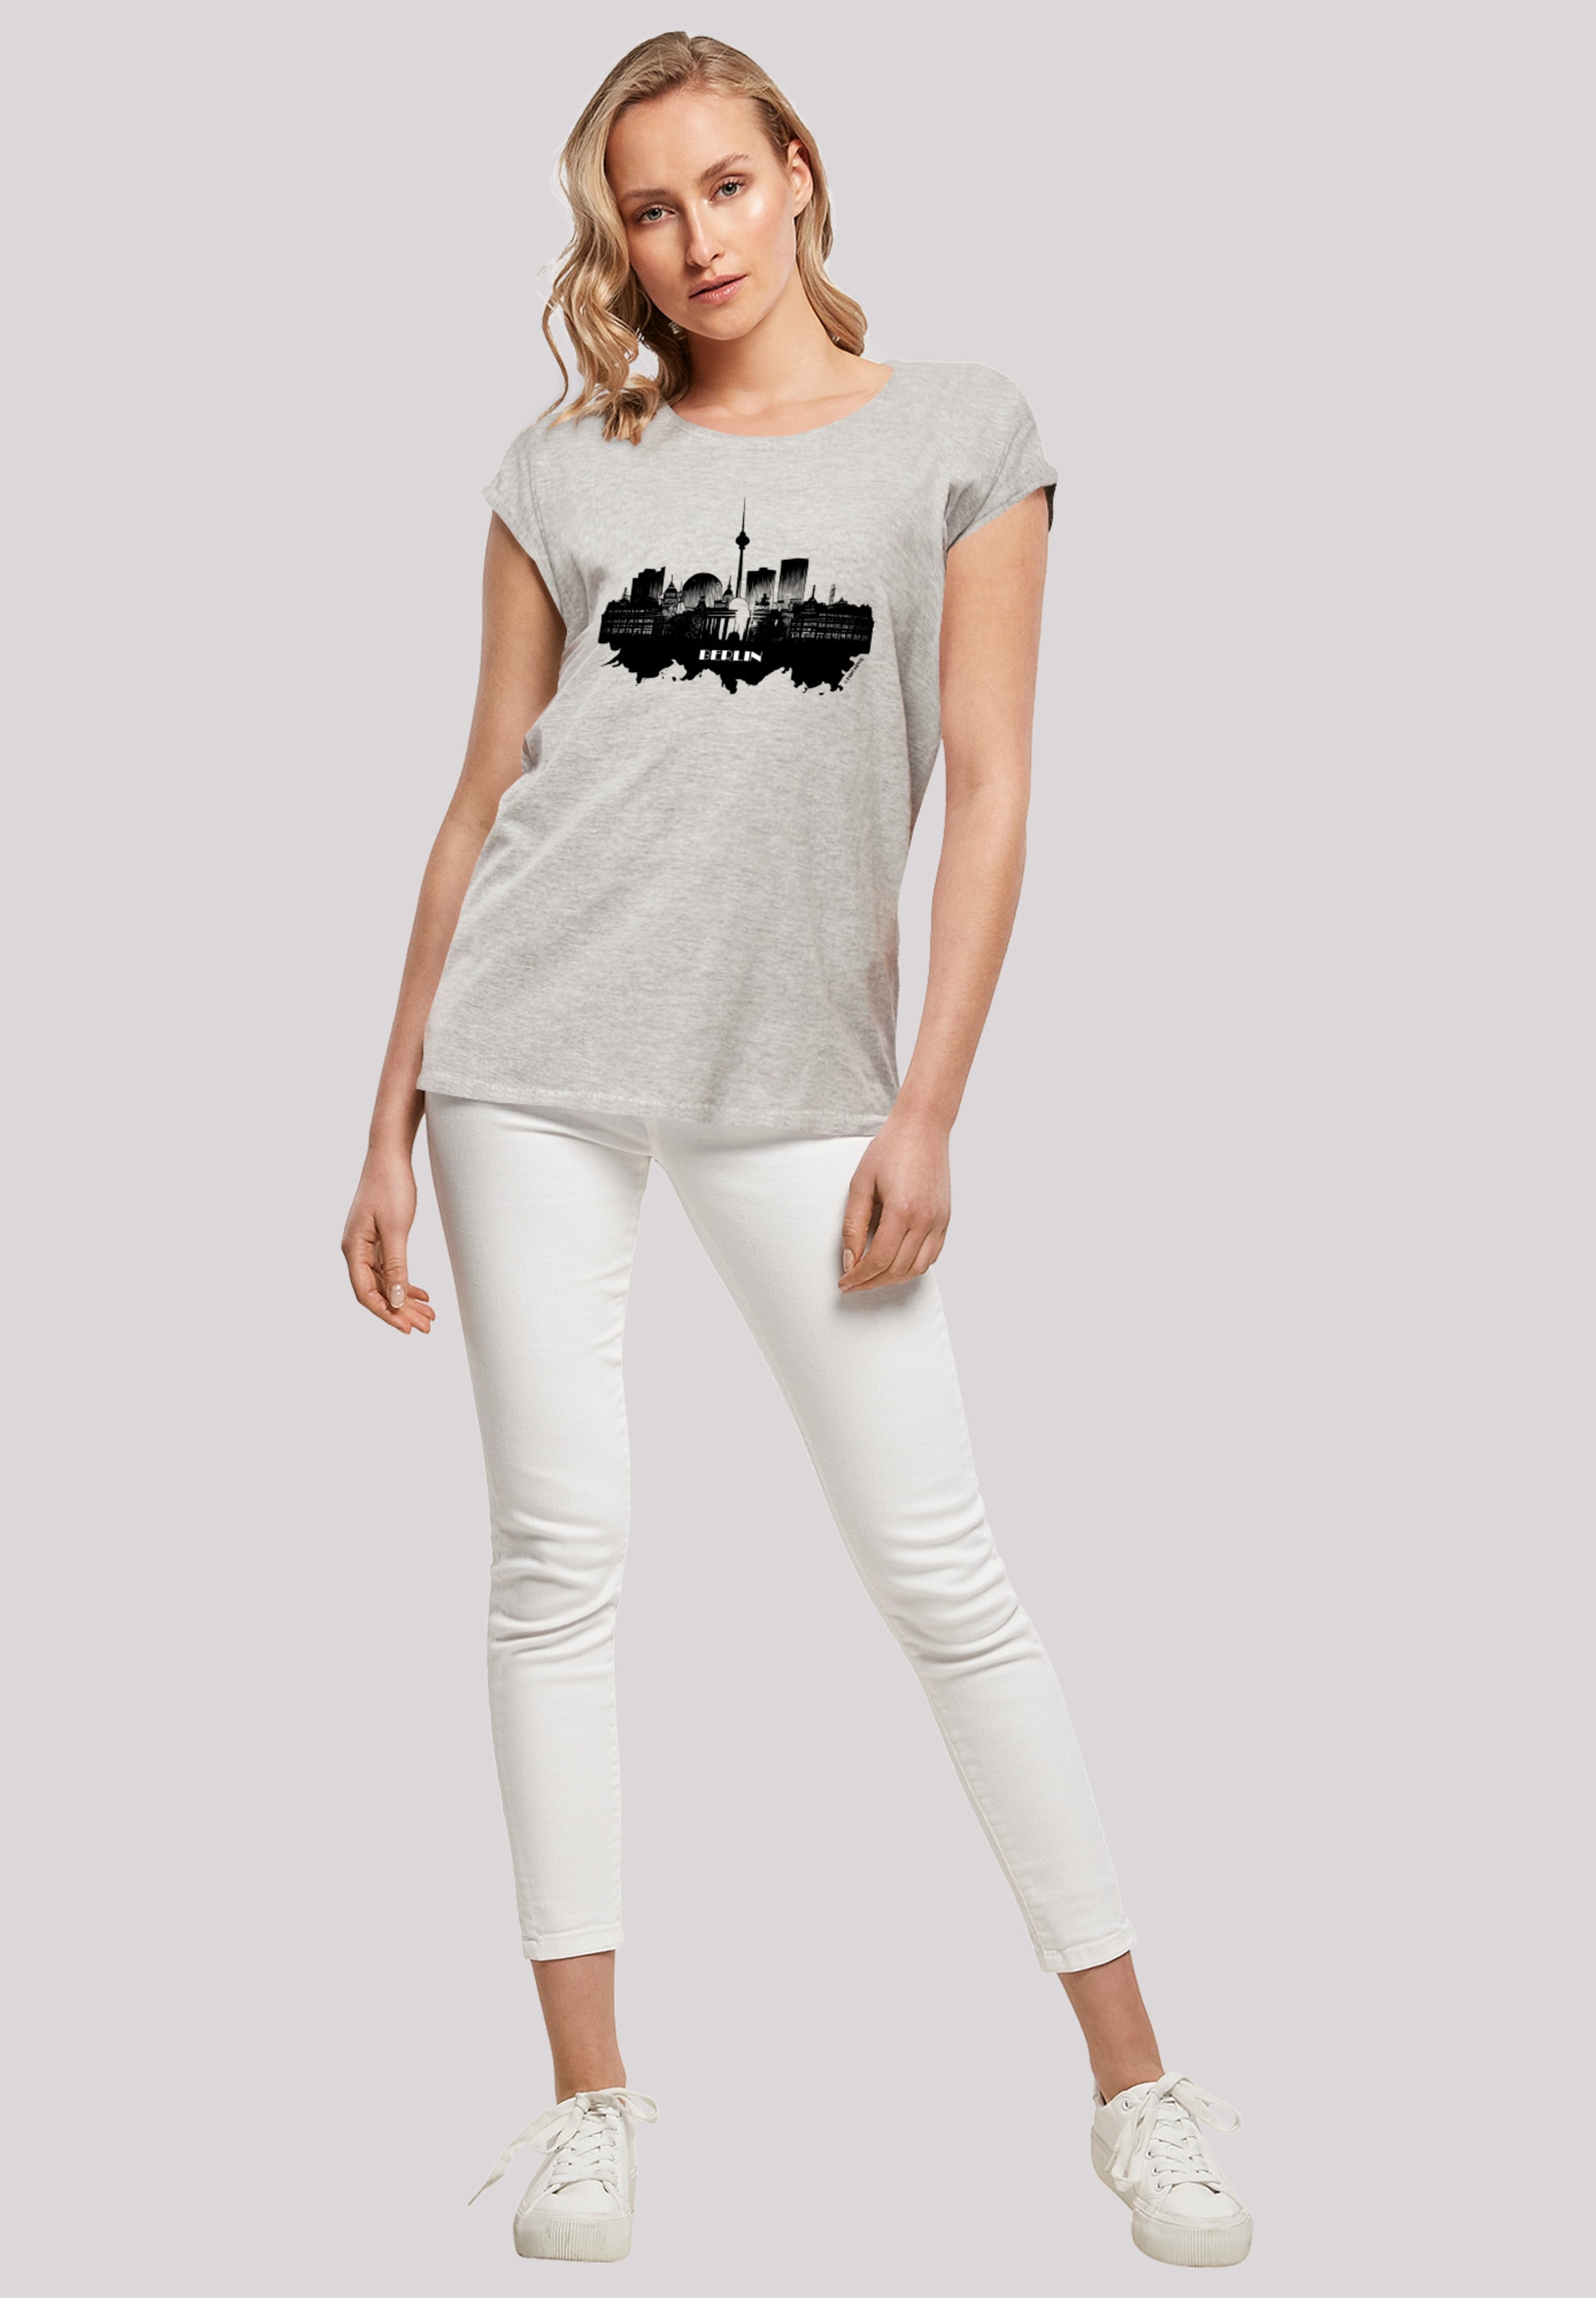 F4NT4STIC T-Shirt »Cities Collection - Berlin skyline«, Print